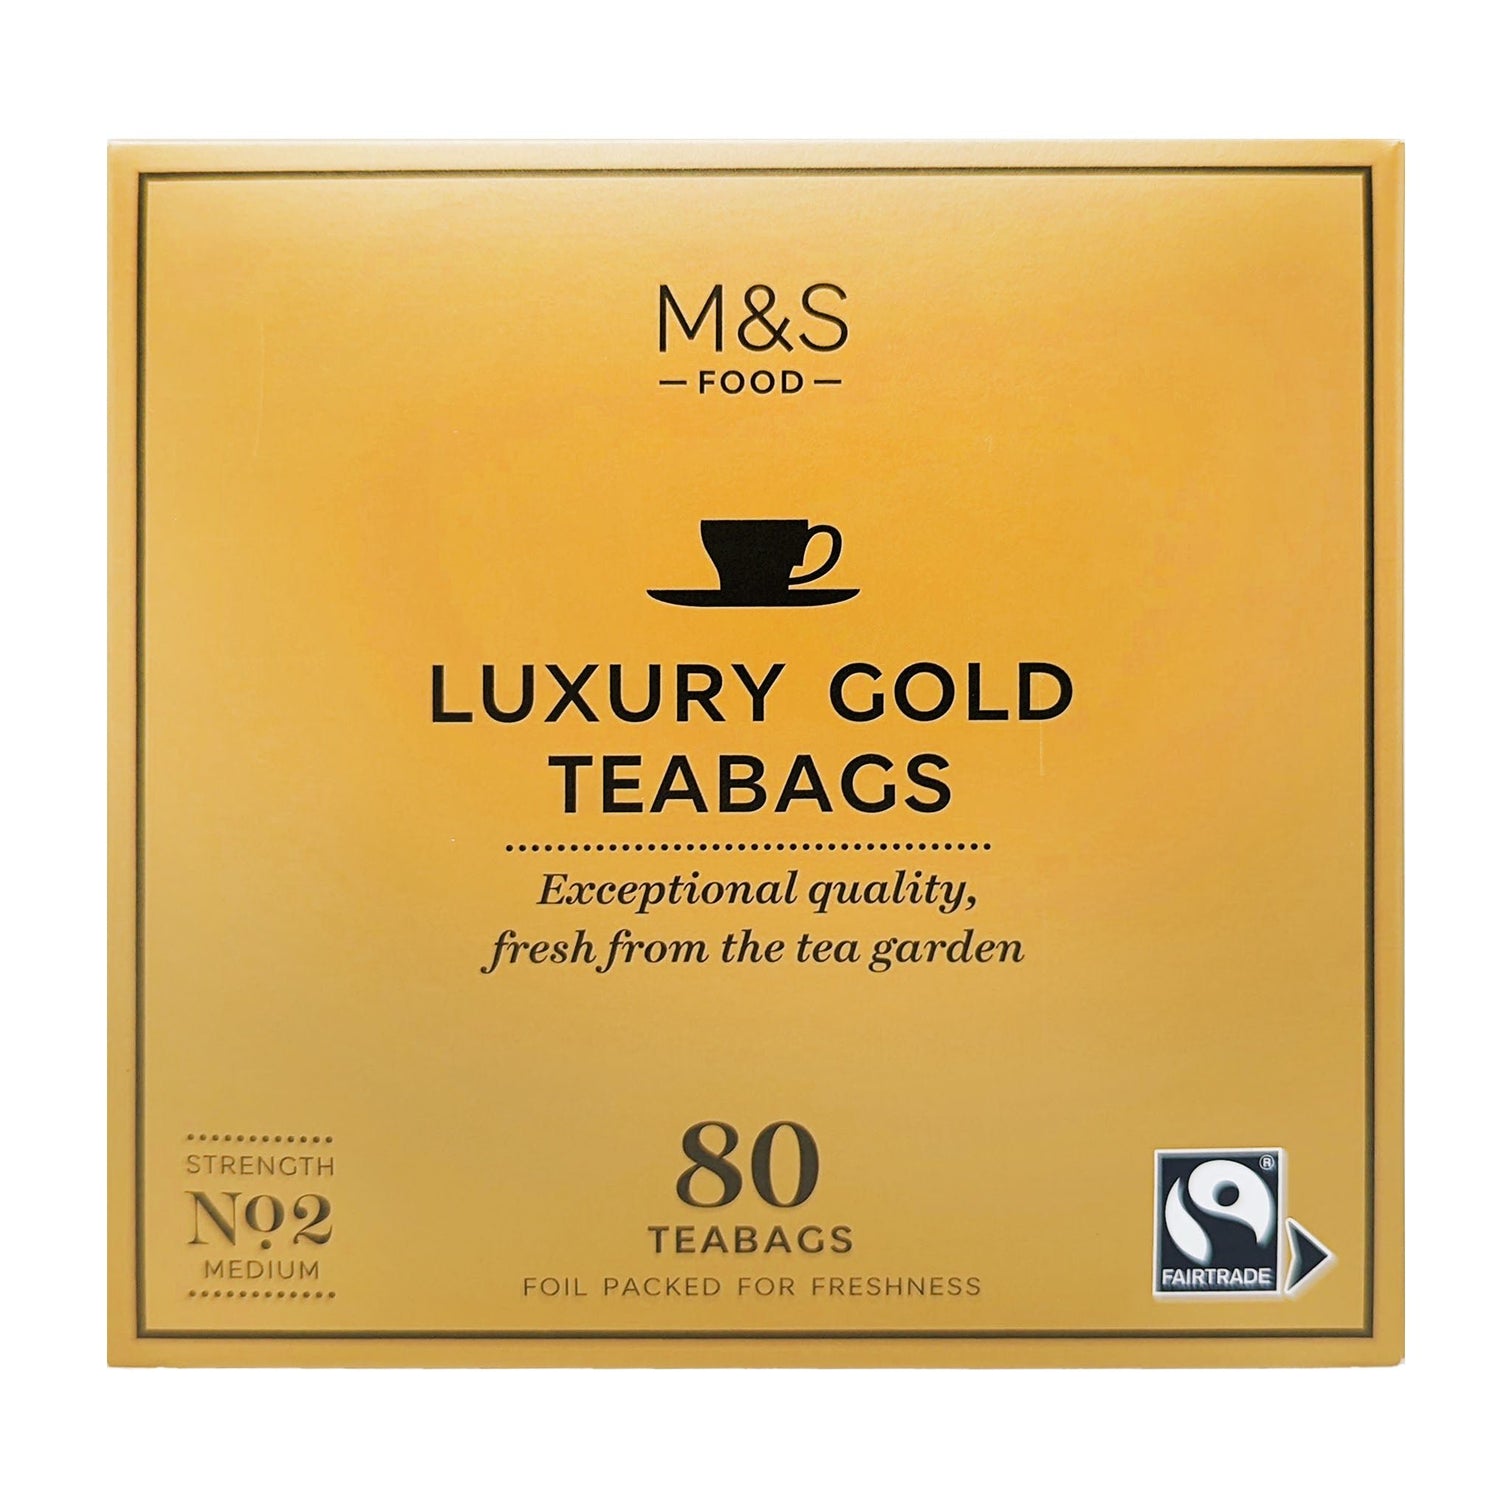 M&S Luxury Gold Teabags 80 Bags – Blighty's British Store